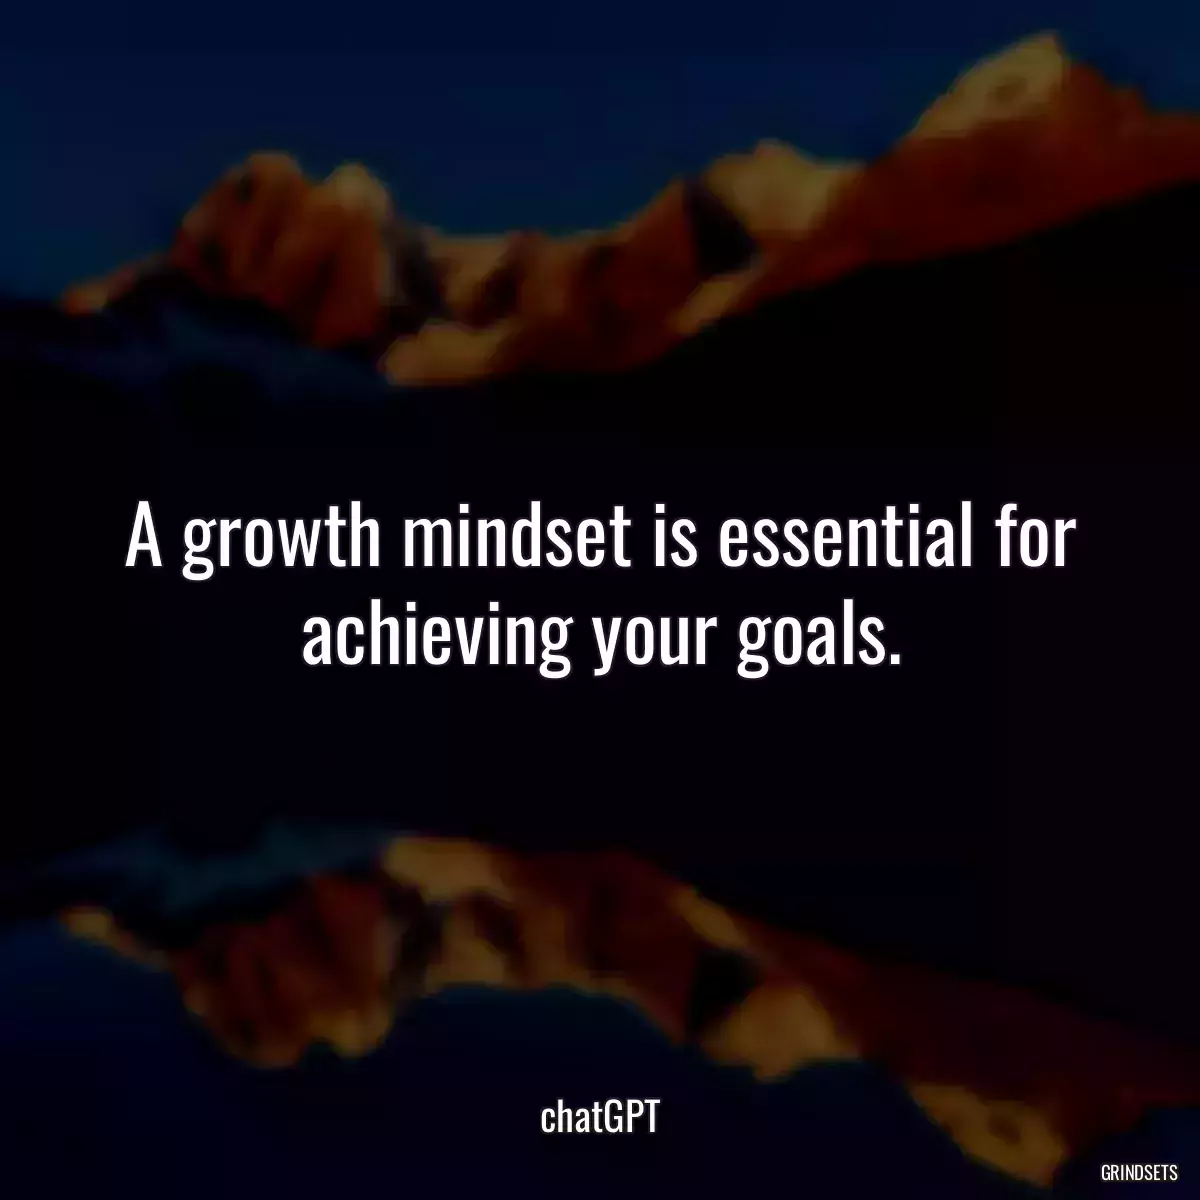 A growth mindset is essential for achieving your goals.